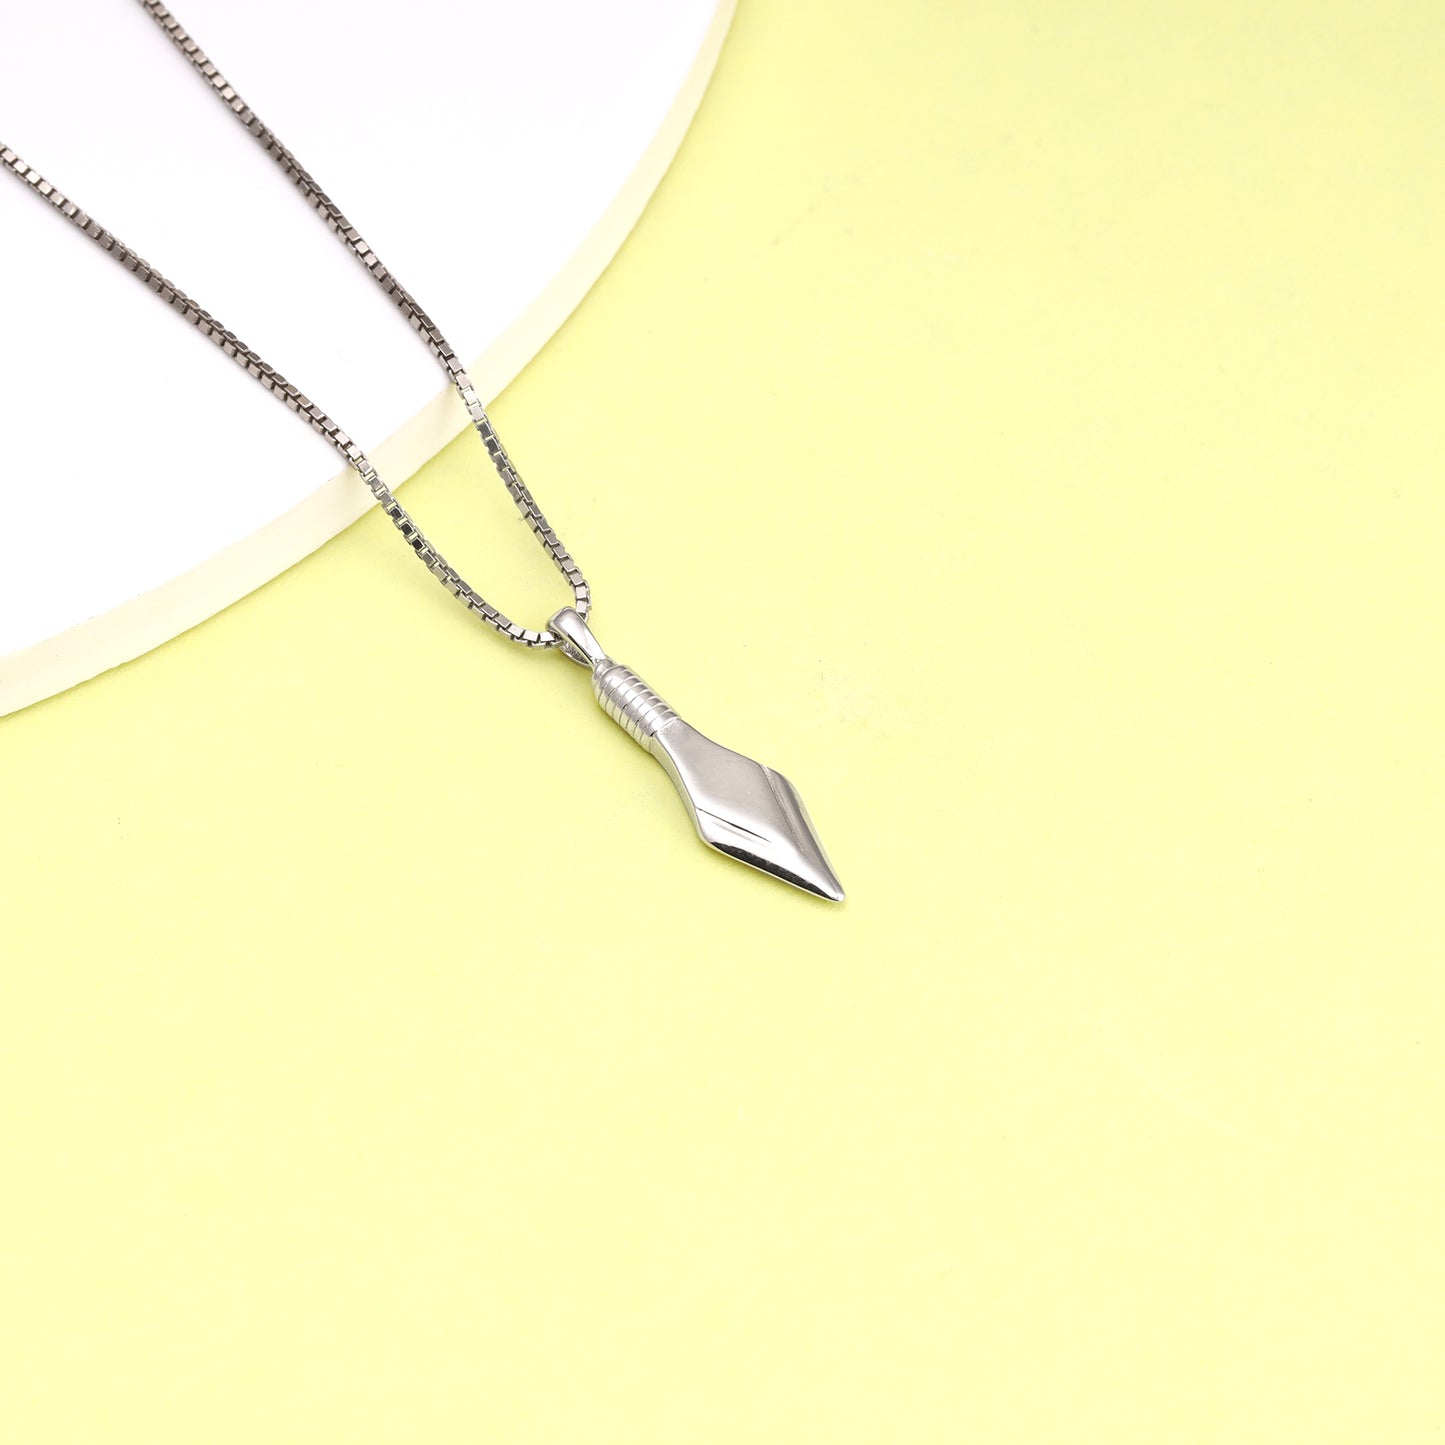 Silver Rhombus Pendant with Box Chain for Him